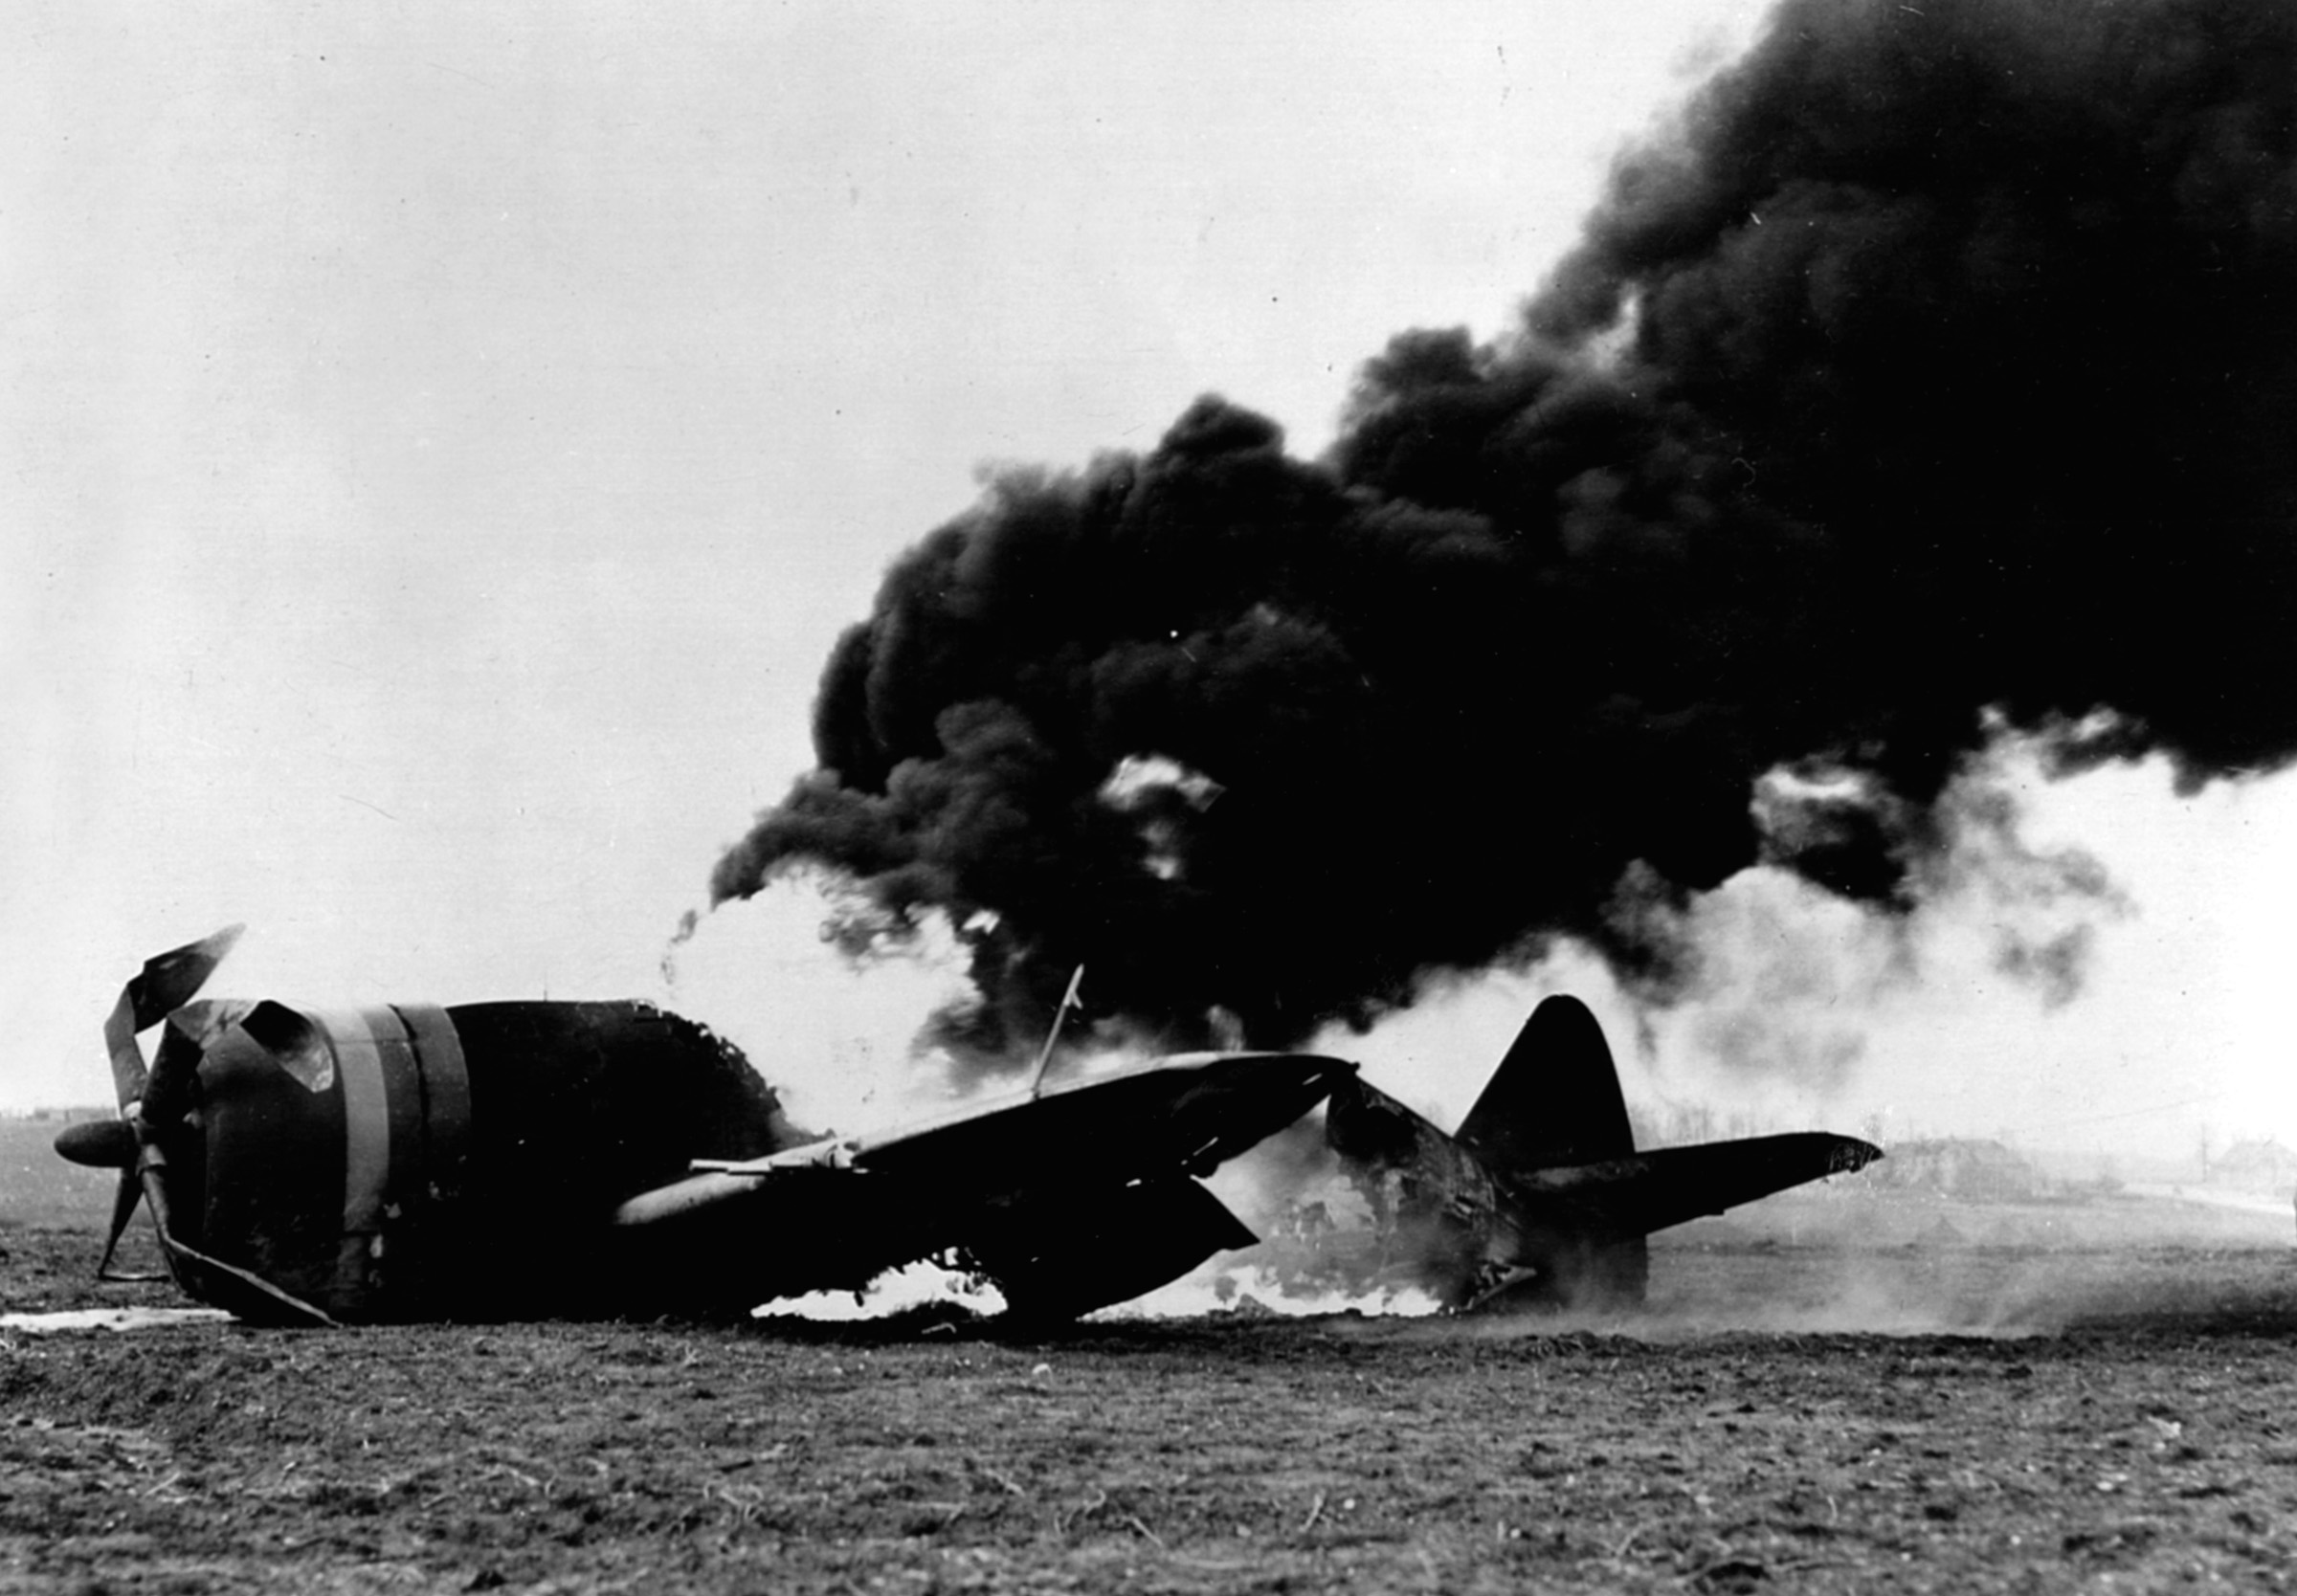 A P-47 Thunderbolt burns on a Belgian runway. Although Operation Bodenplatte did catch the Allies by surprise, the operation would ultimately be disastrous for Hitler.